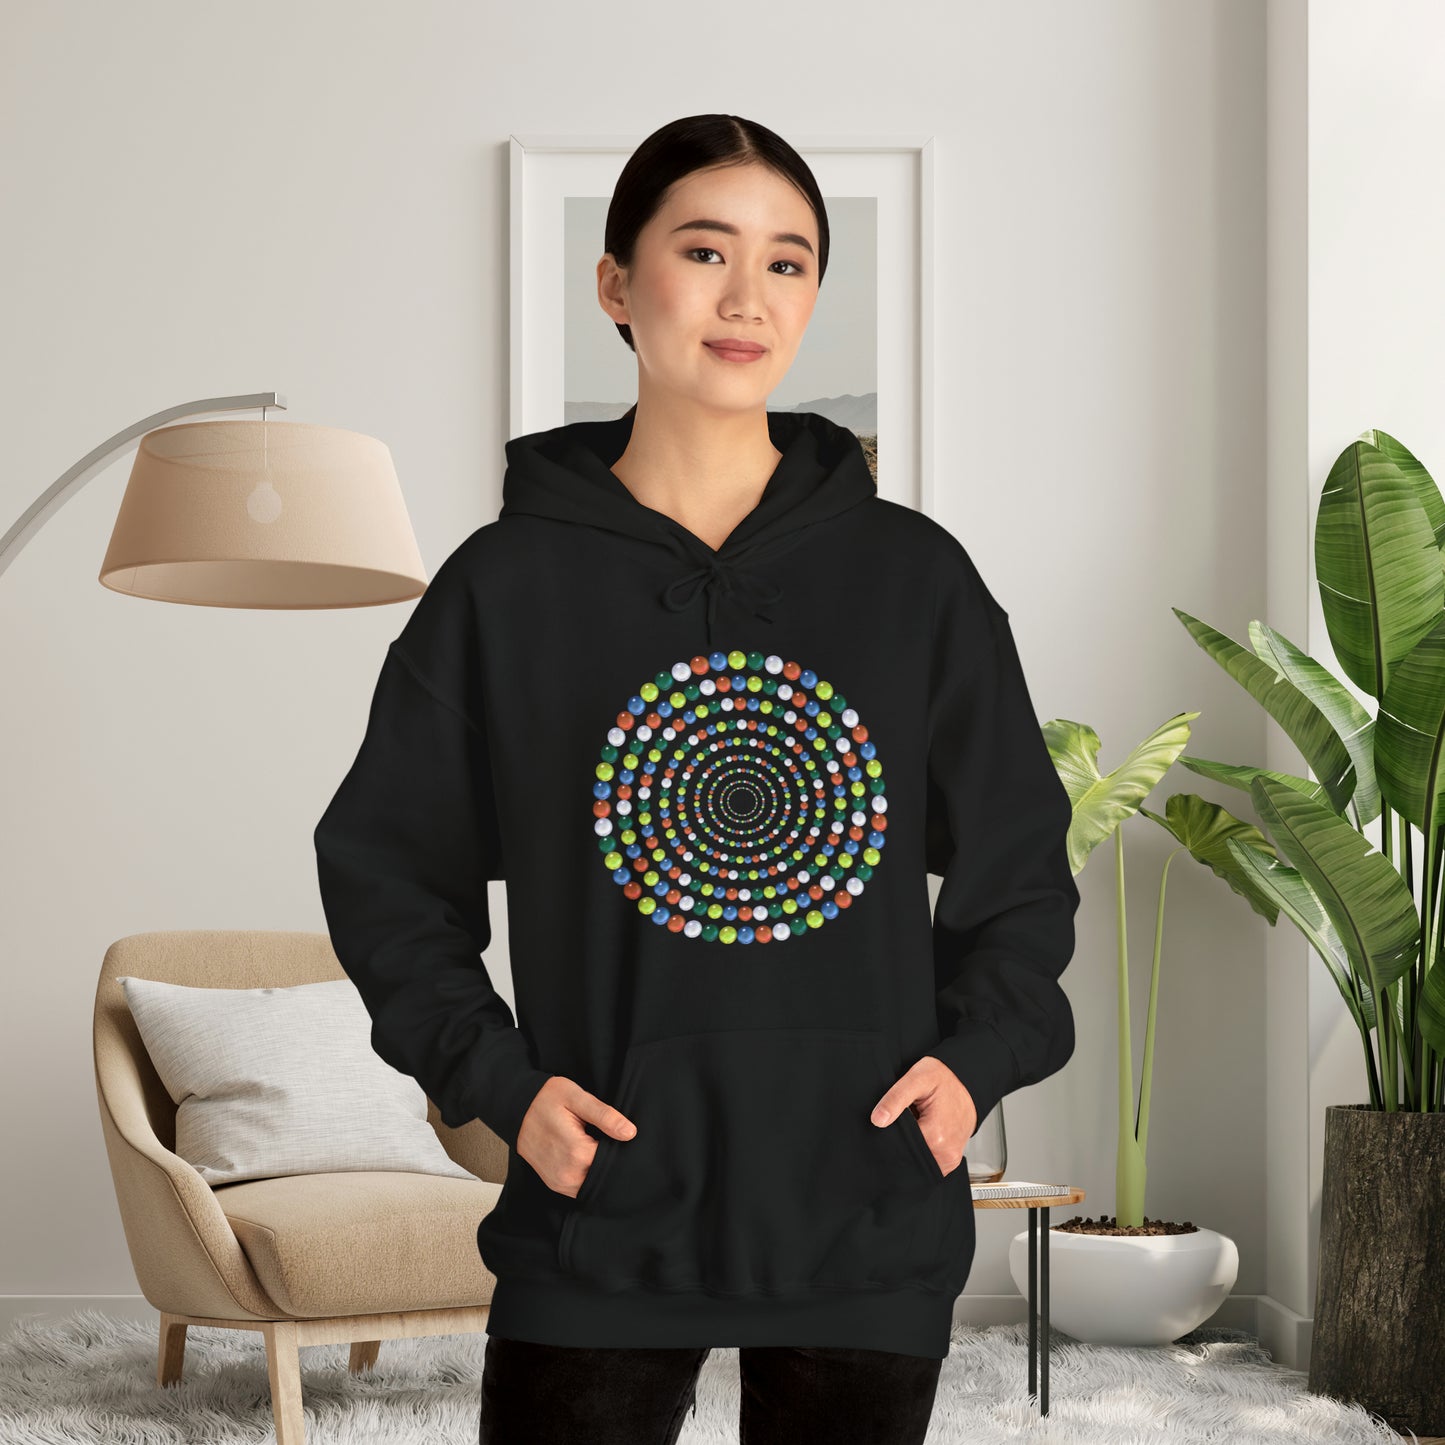 Marbles, colorful and so much fun on this Unisex Heavy Blend™ Hooded Sweatshirt